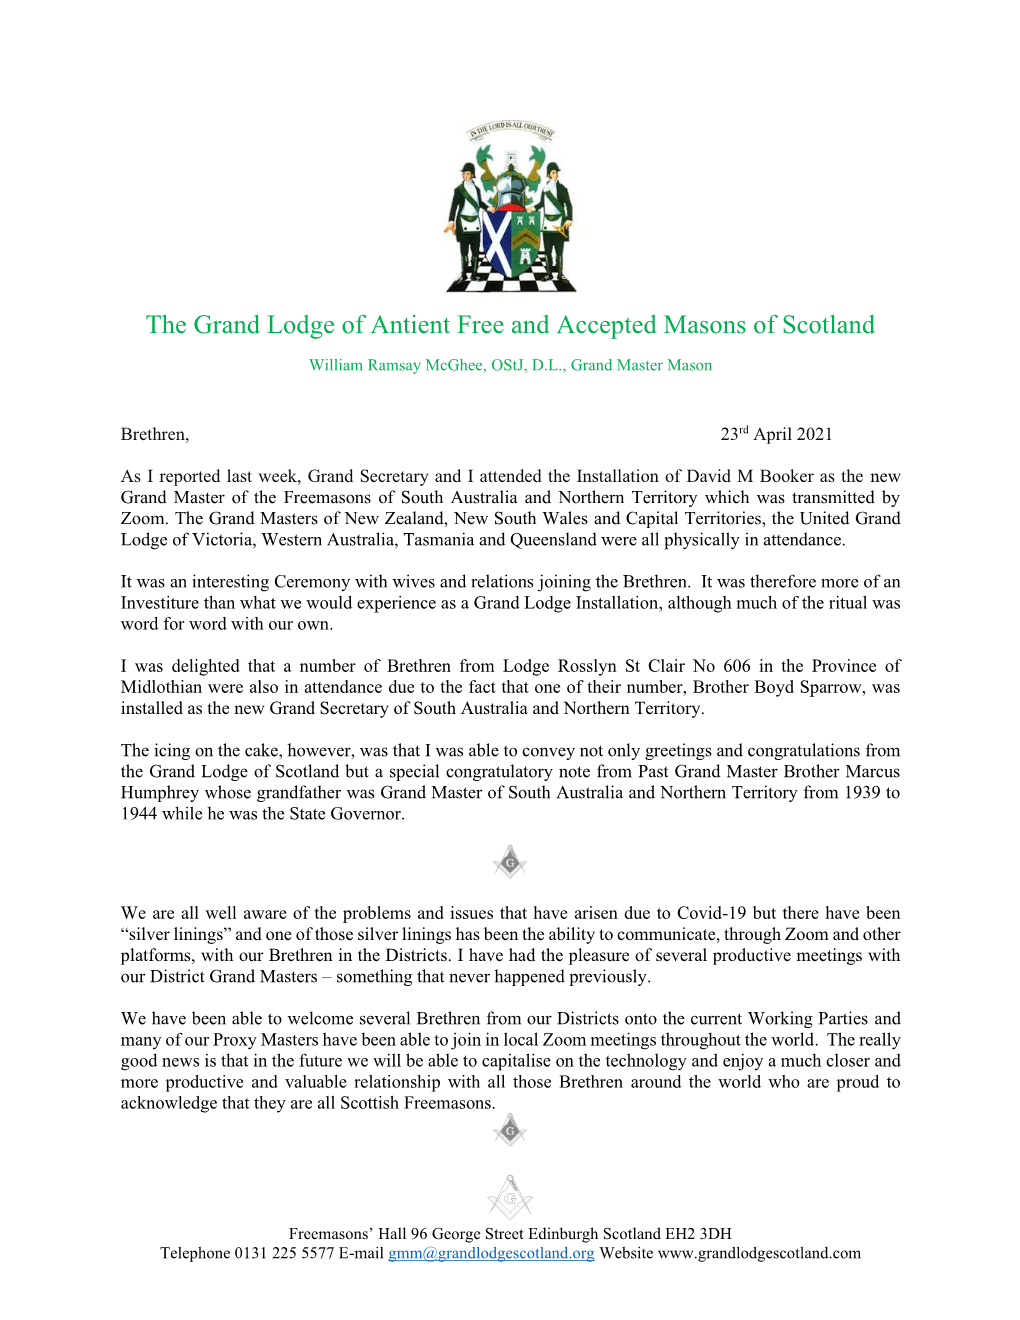 The Grand Lodge of Antient Free and Accepted Masons of Scotland